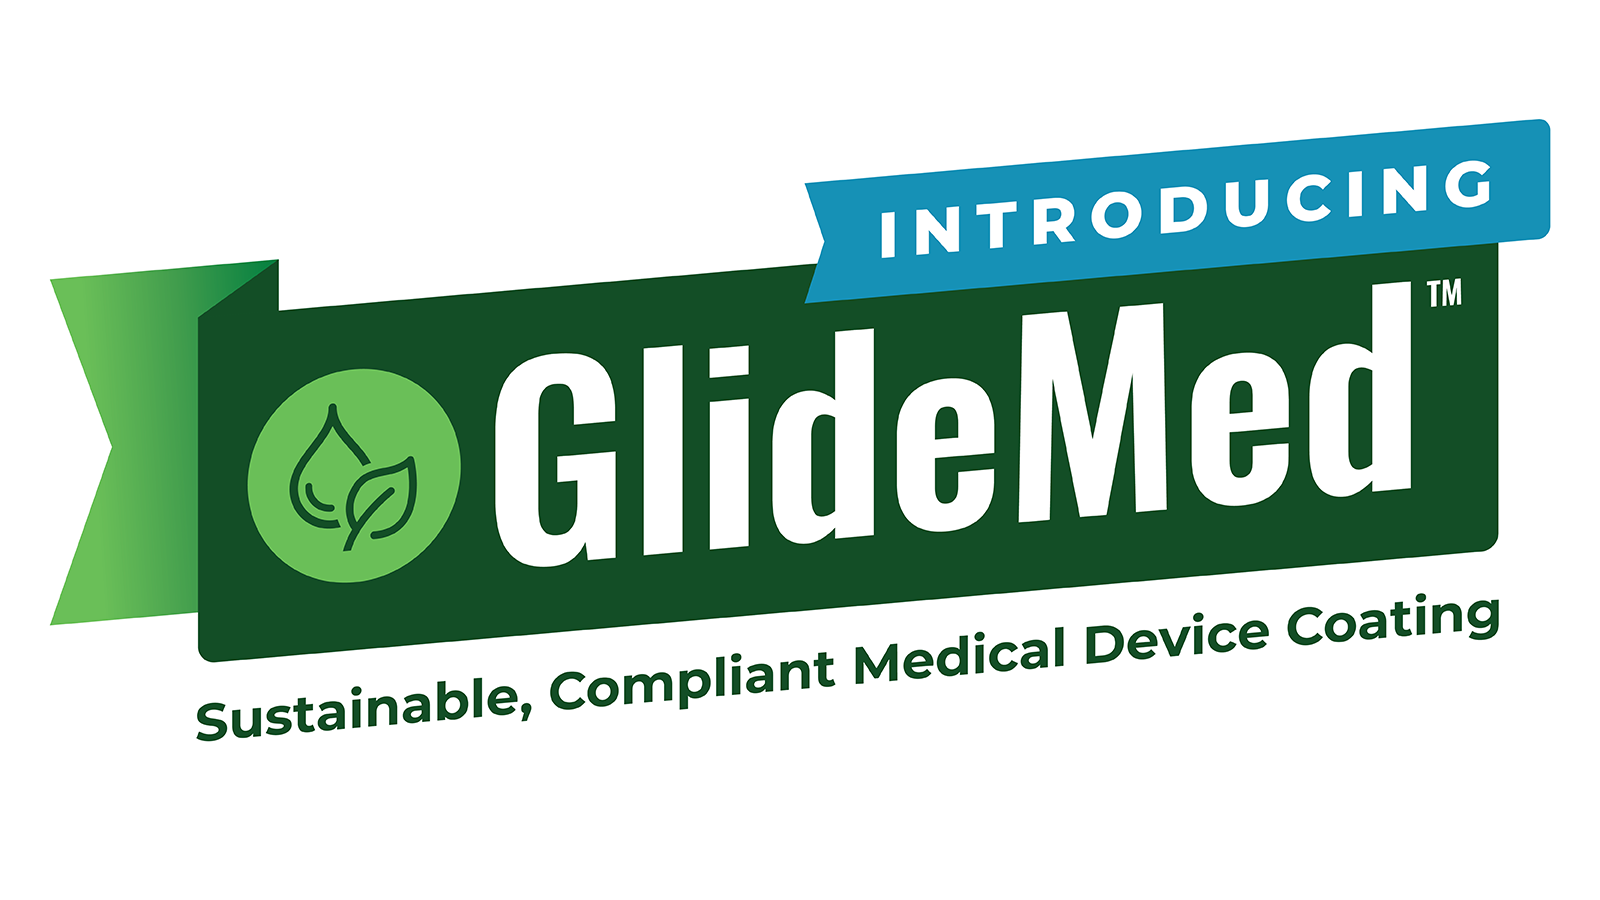 GlideMed™ sustainable, compliant medical device coating